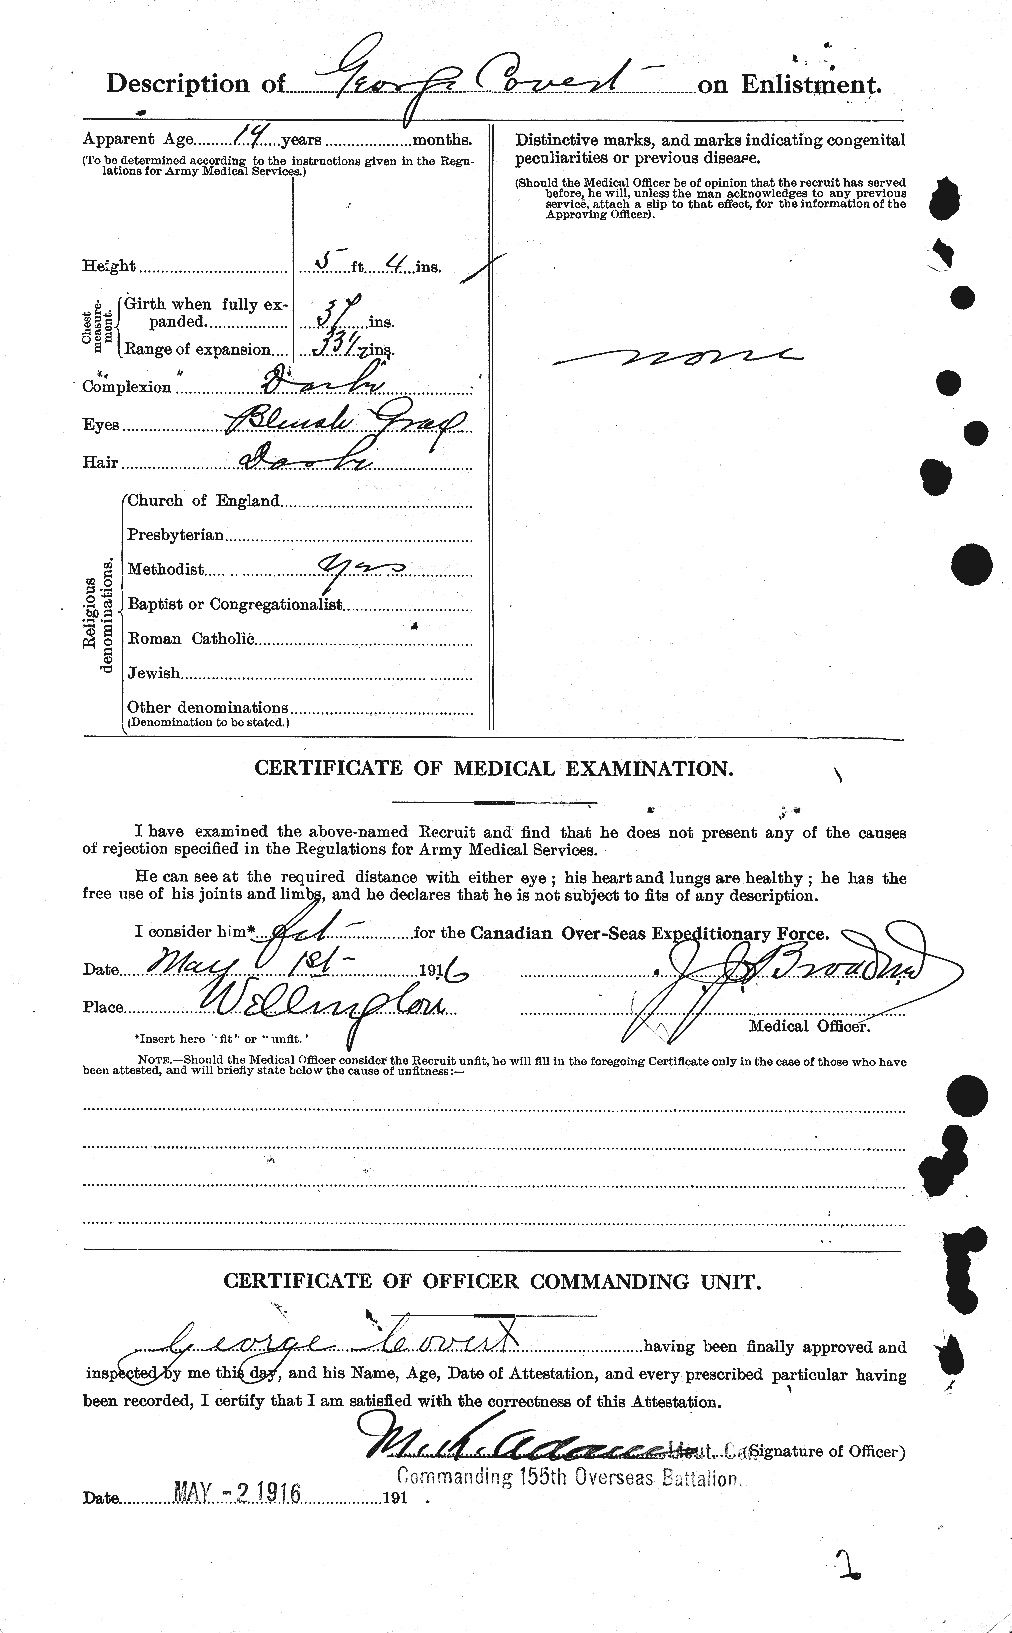 Personnel Records of the First World War - CEF 059273b